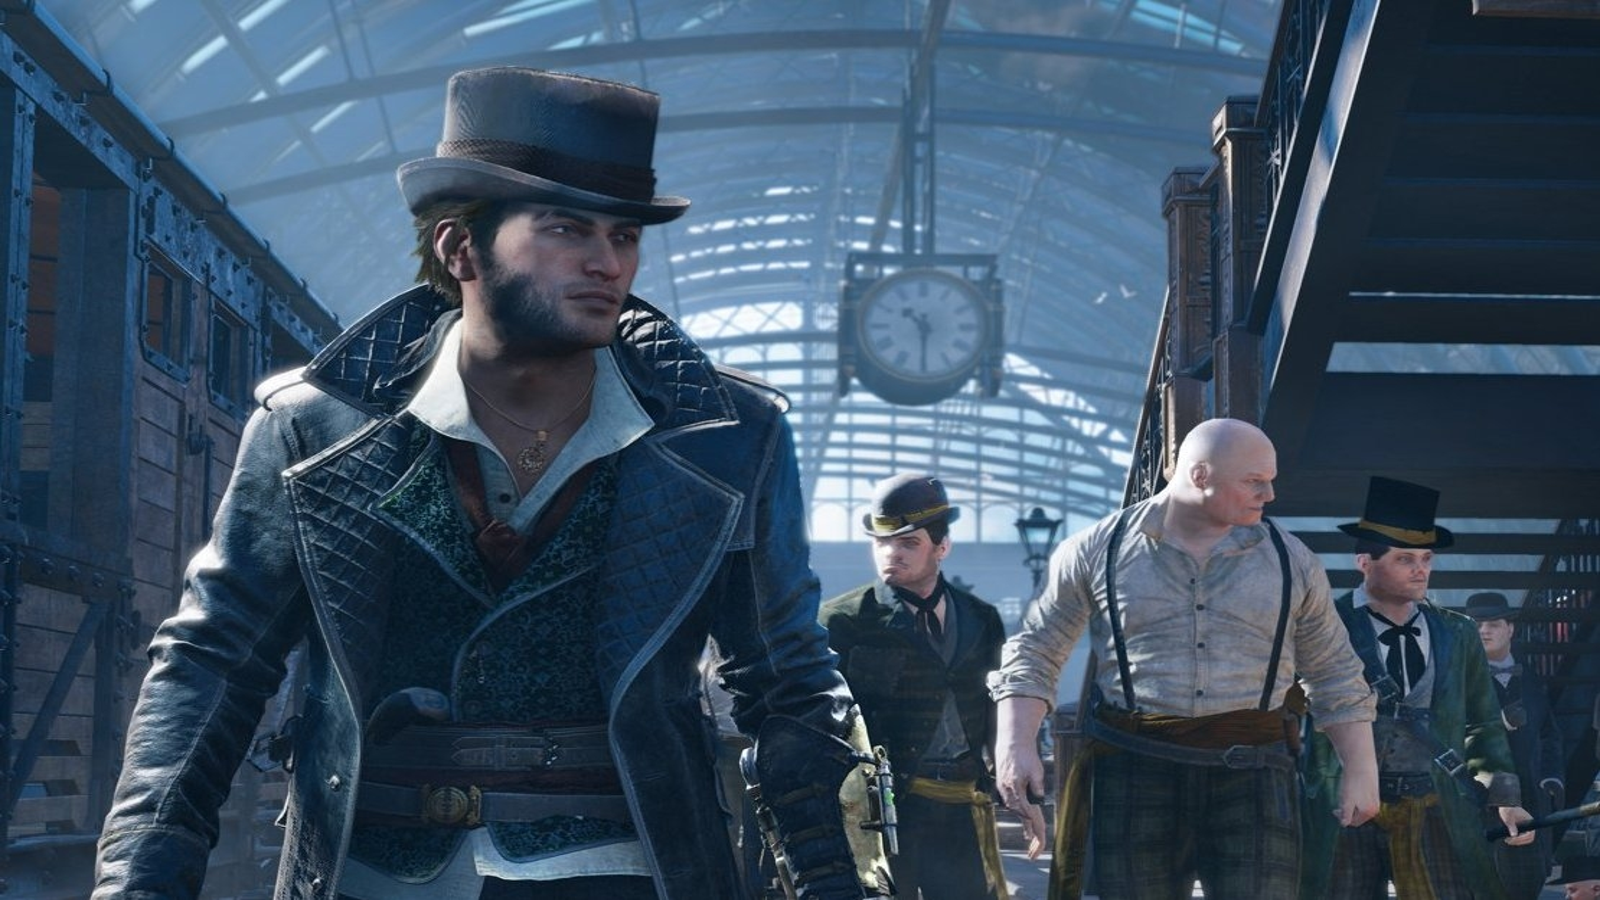 Фото синдикат. Assassin's Creed Syndicate. Ассасин Крид Синдикат трейлер. Assassin’s Creed Syndicate превью. Руке Syndicate.